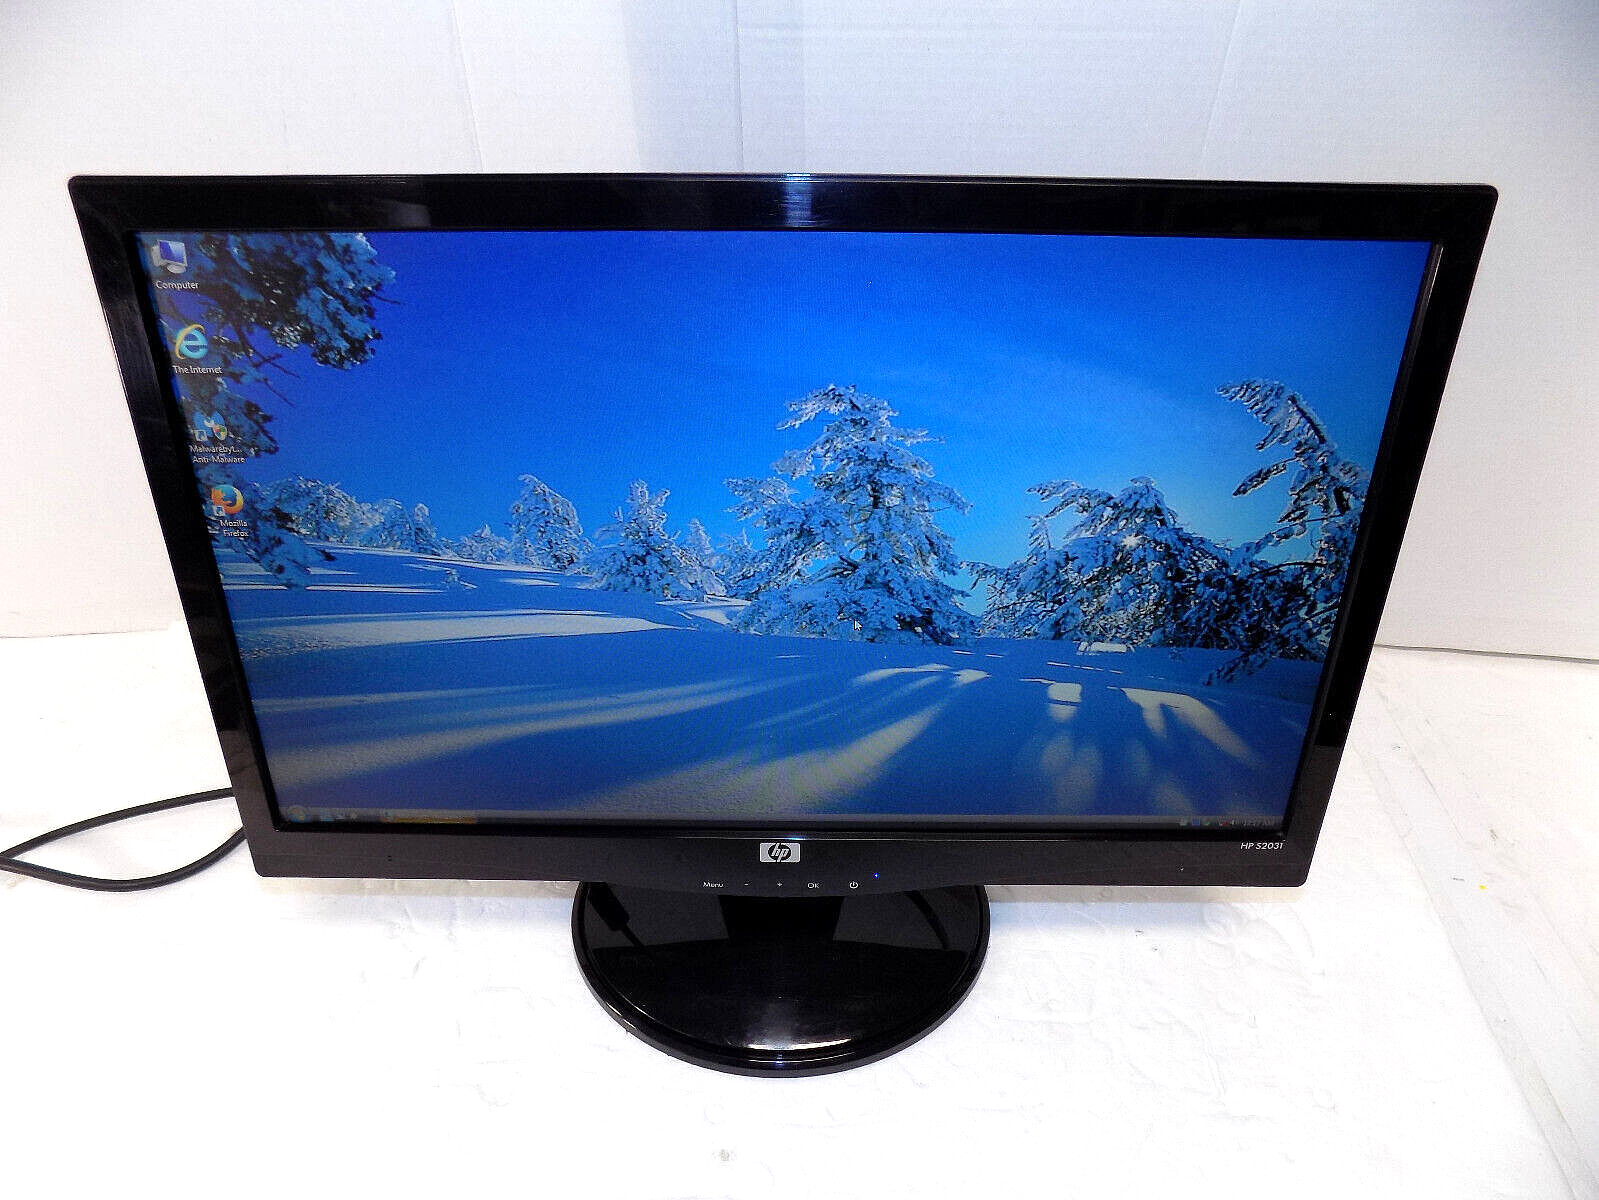 HP S2031 Flat Screen LCD 20 inch Computer Monitor with Cables